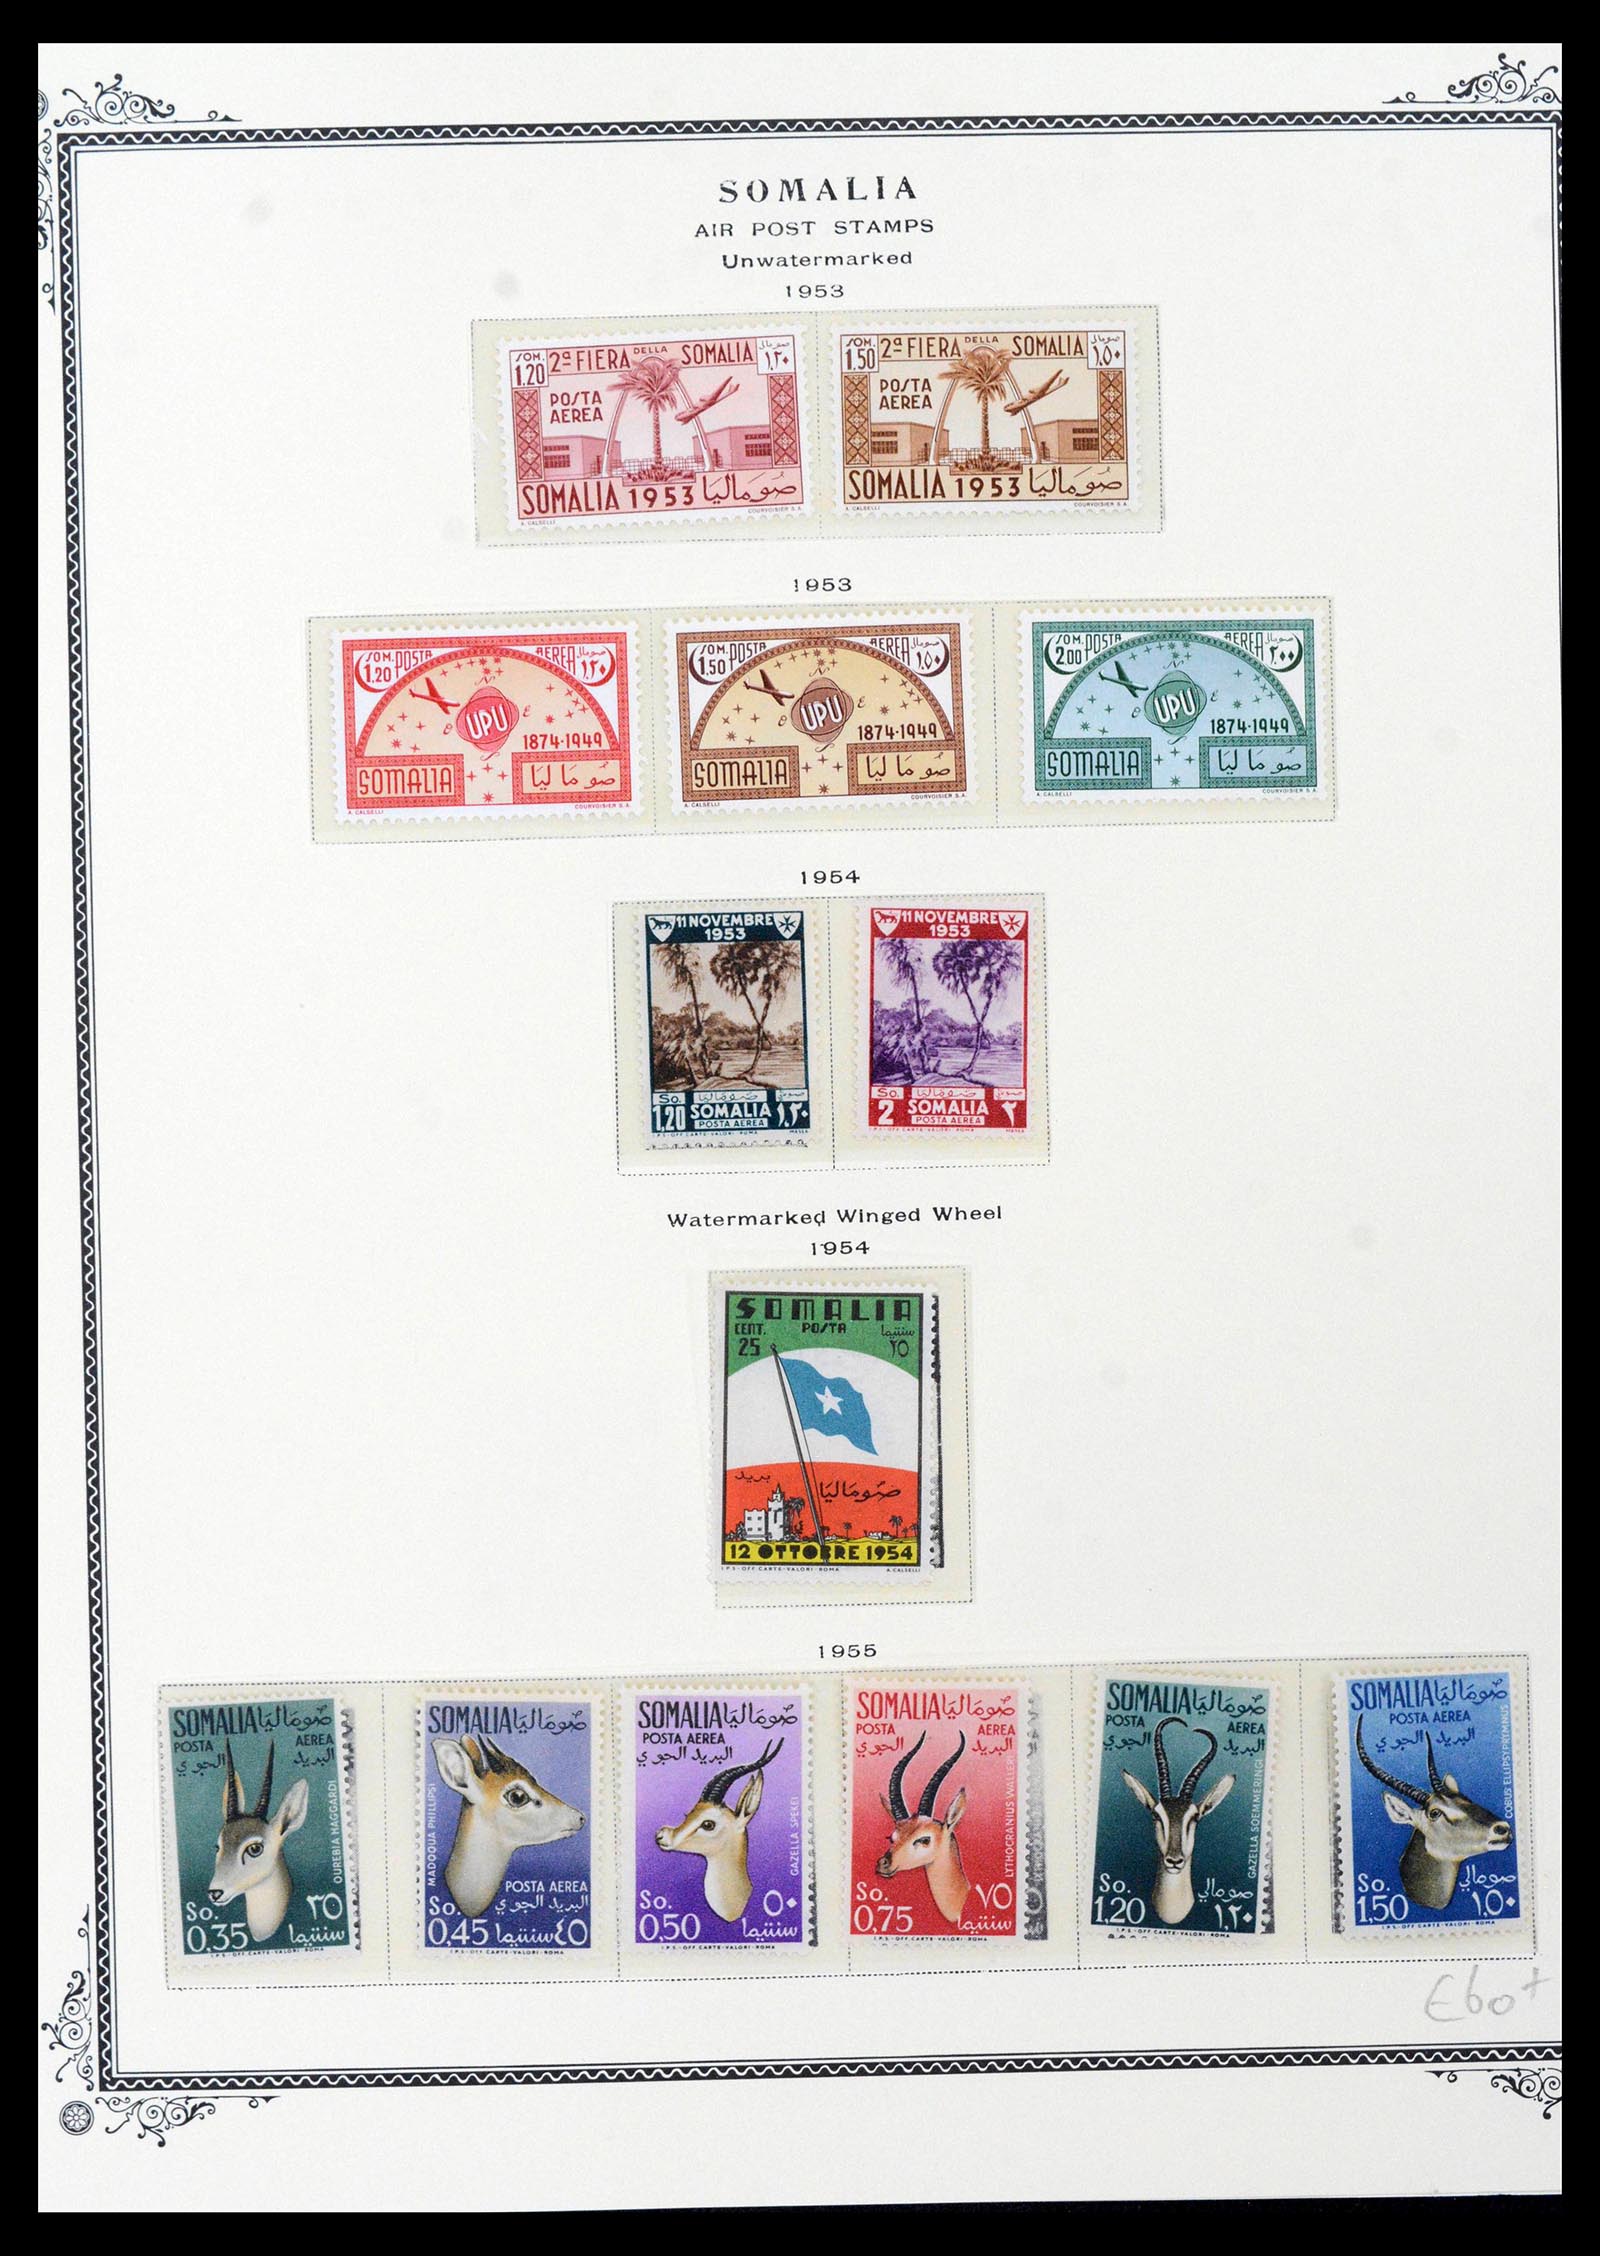 39011 0032 - Stamp collection 39011 Somalia complete 1903-1960.